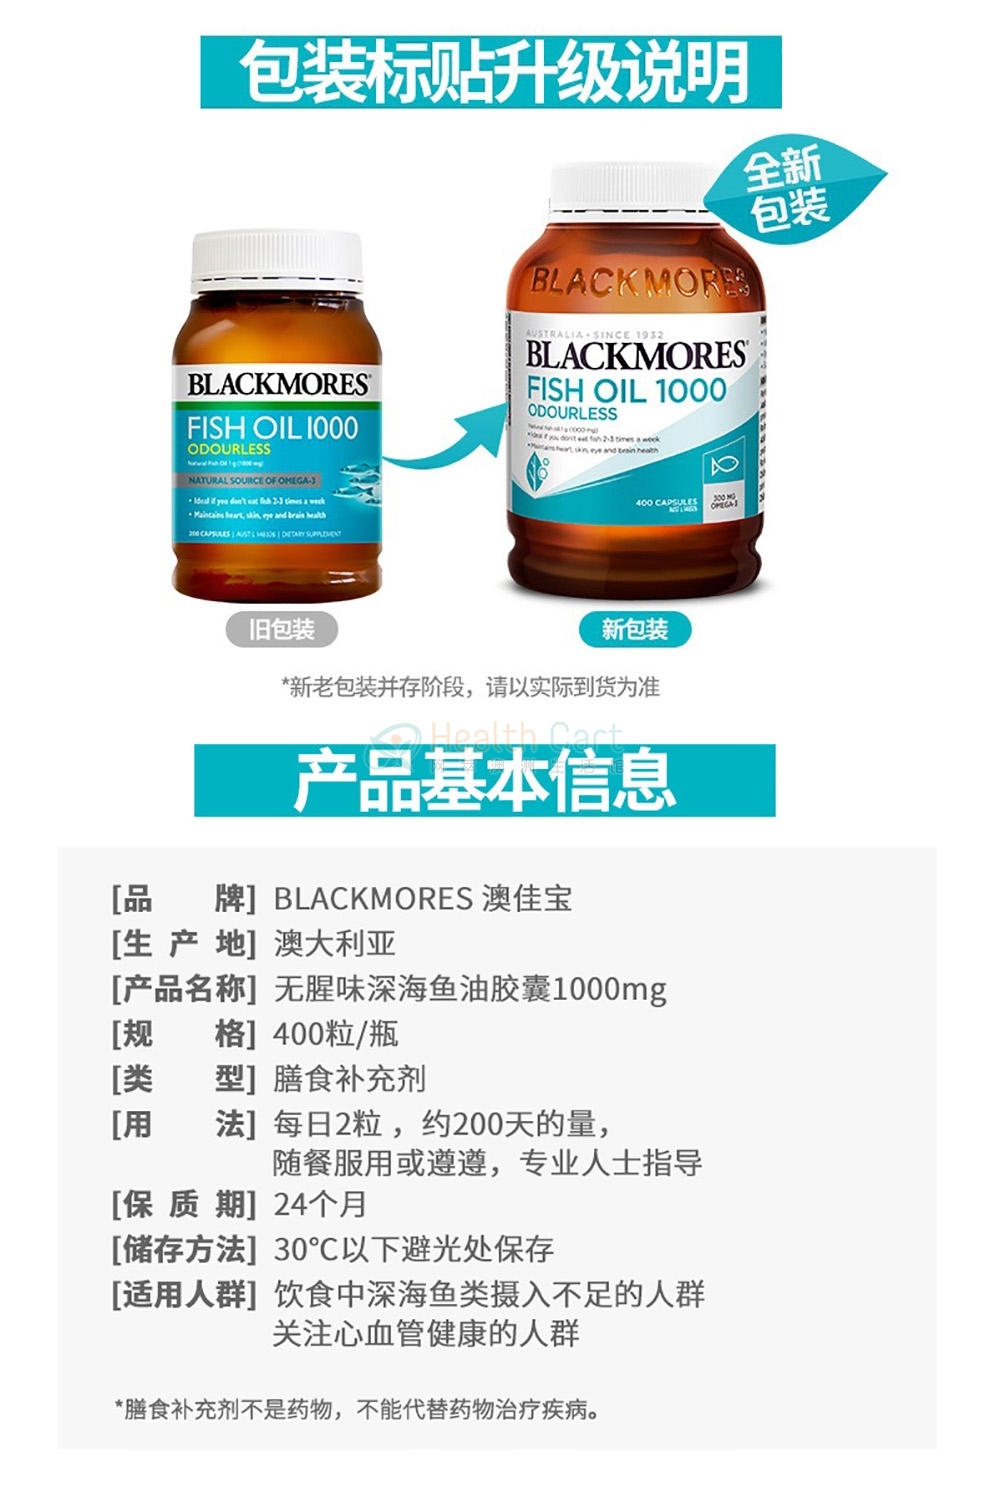 Blackmores Odourless Fish Oil 1000mg 400 Capsules - @blackmores odourless fish oil 1000mg 400 capsules - 11 - Health Cart